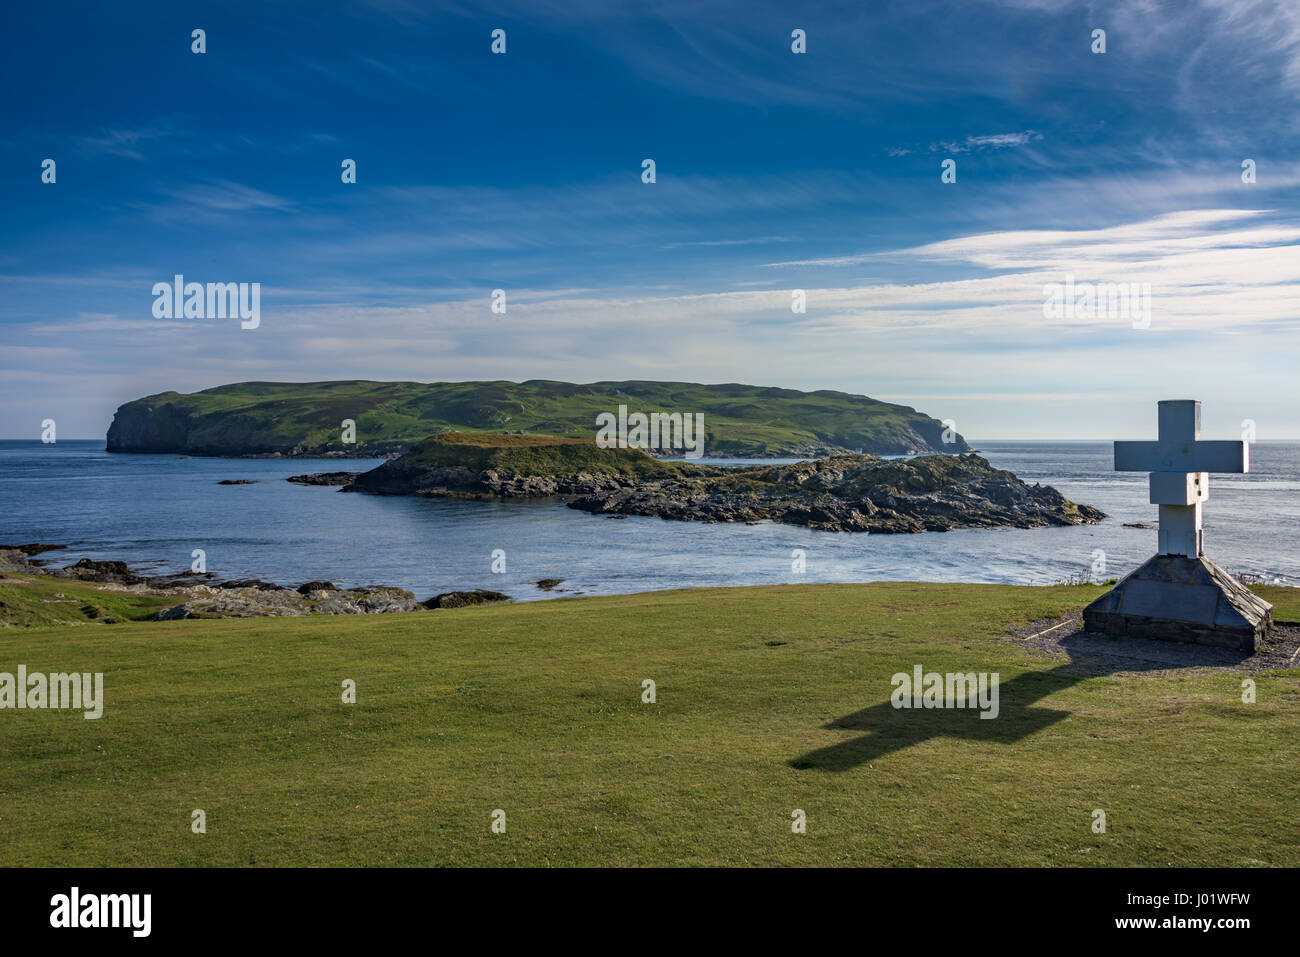 The Thousla Cross, Kitterland & Calf of Man, from The Sound, Isle of Man. Stock Photo